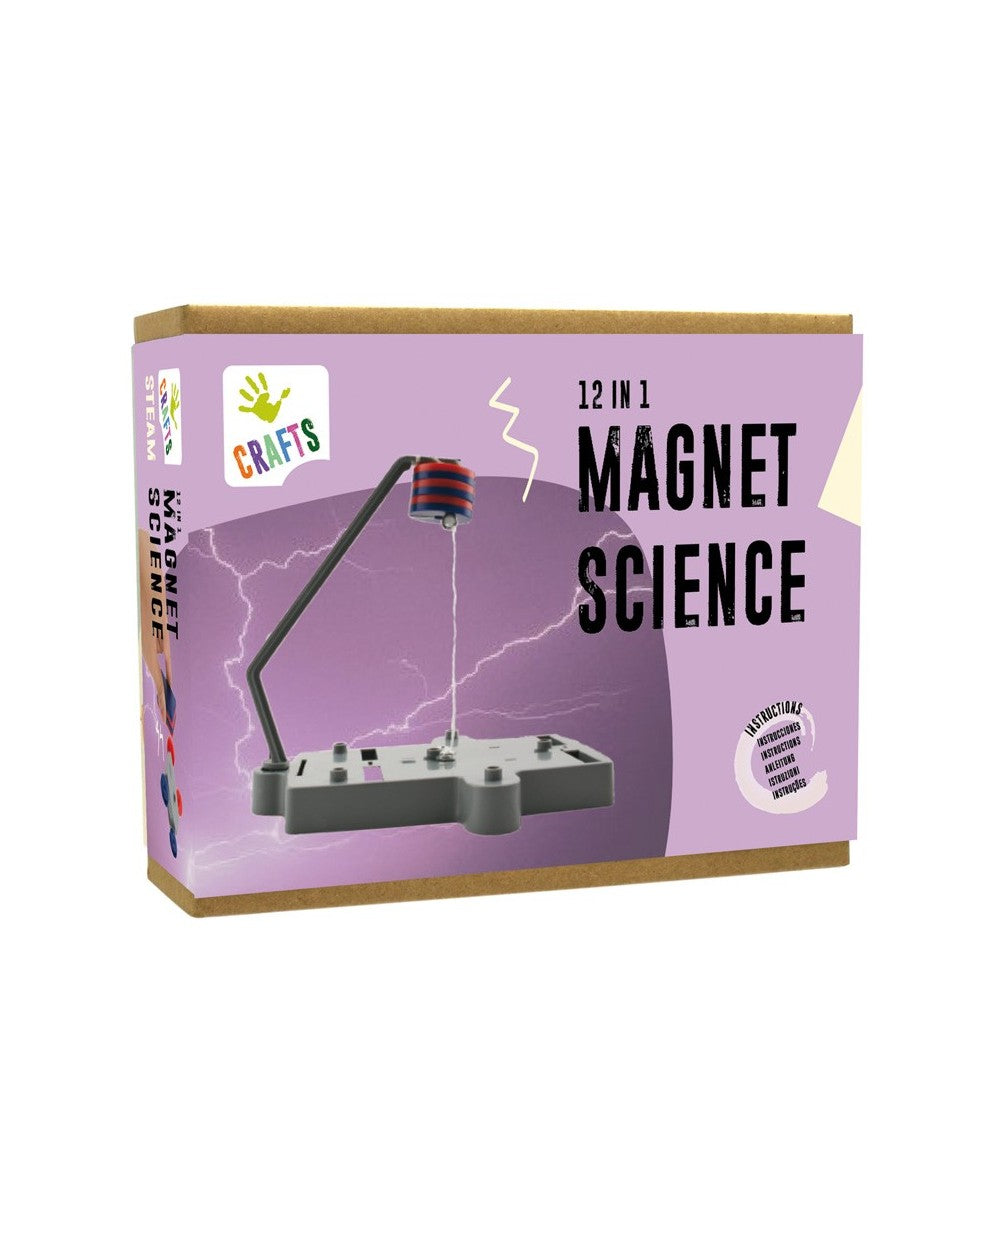 12-in-1 magnet science